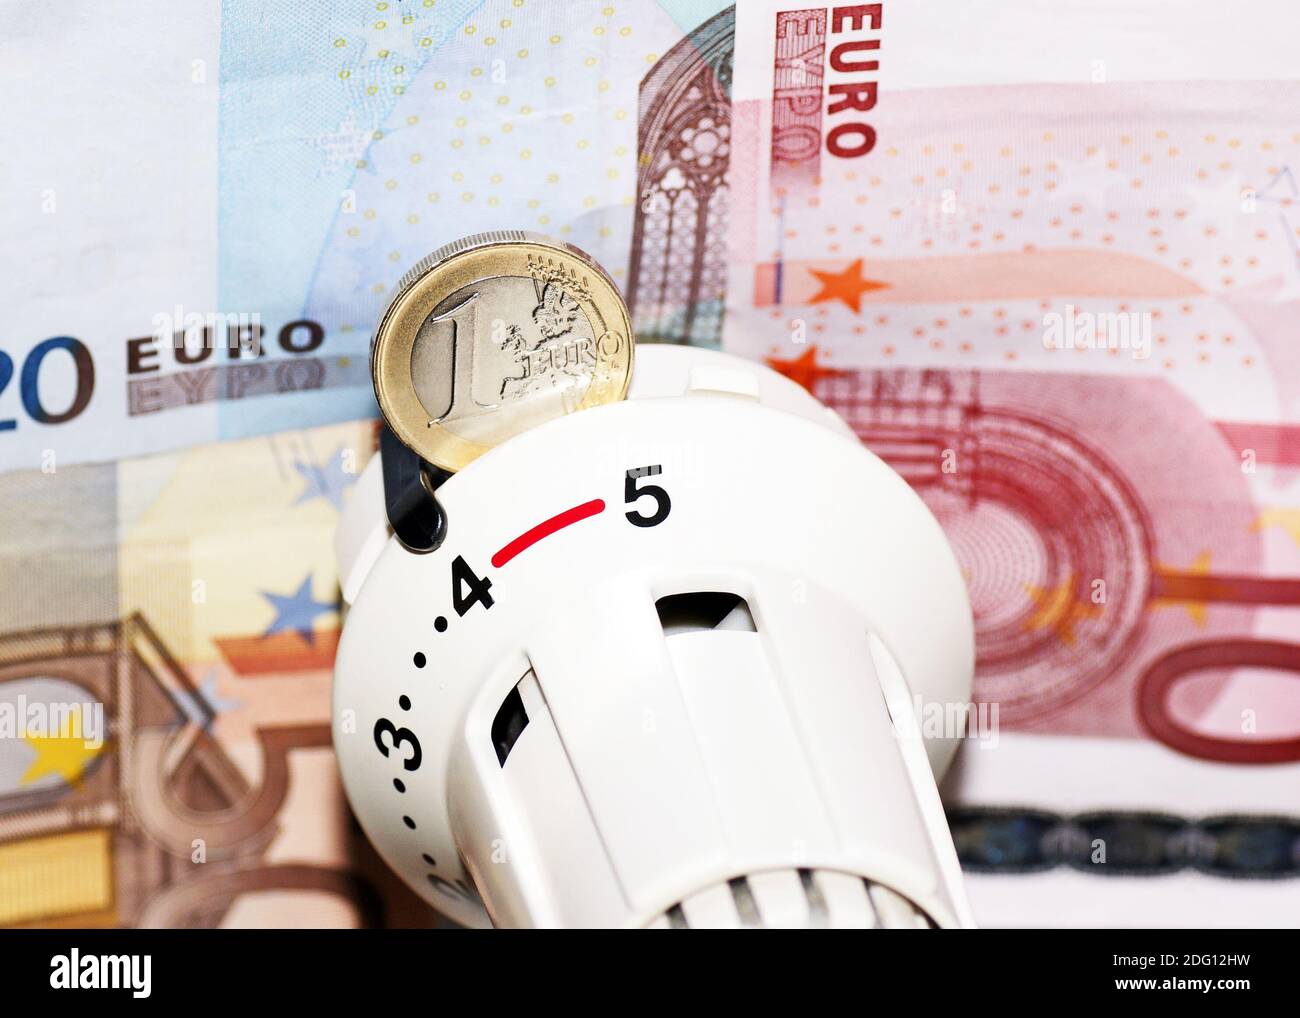 Heating and Euros / Costs Stock Photo